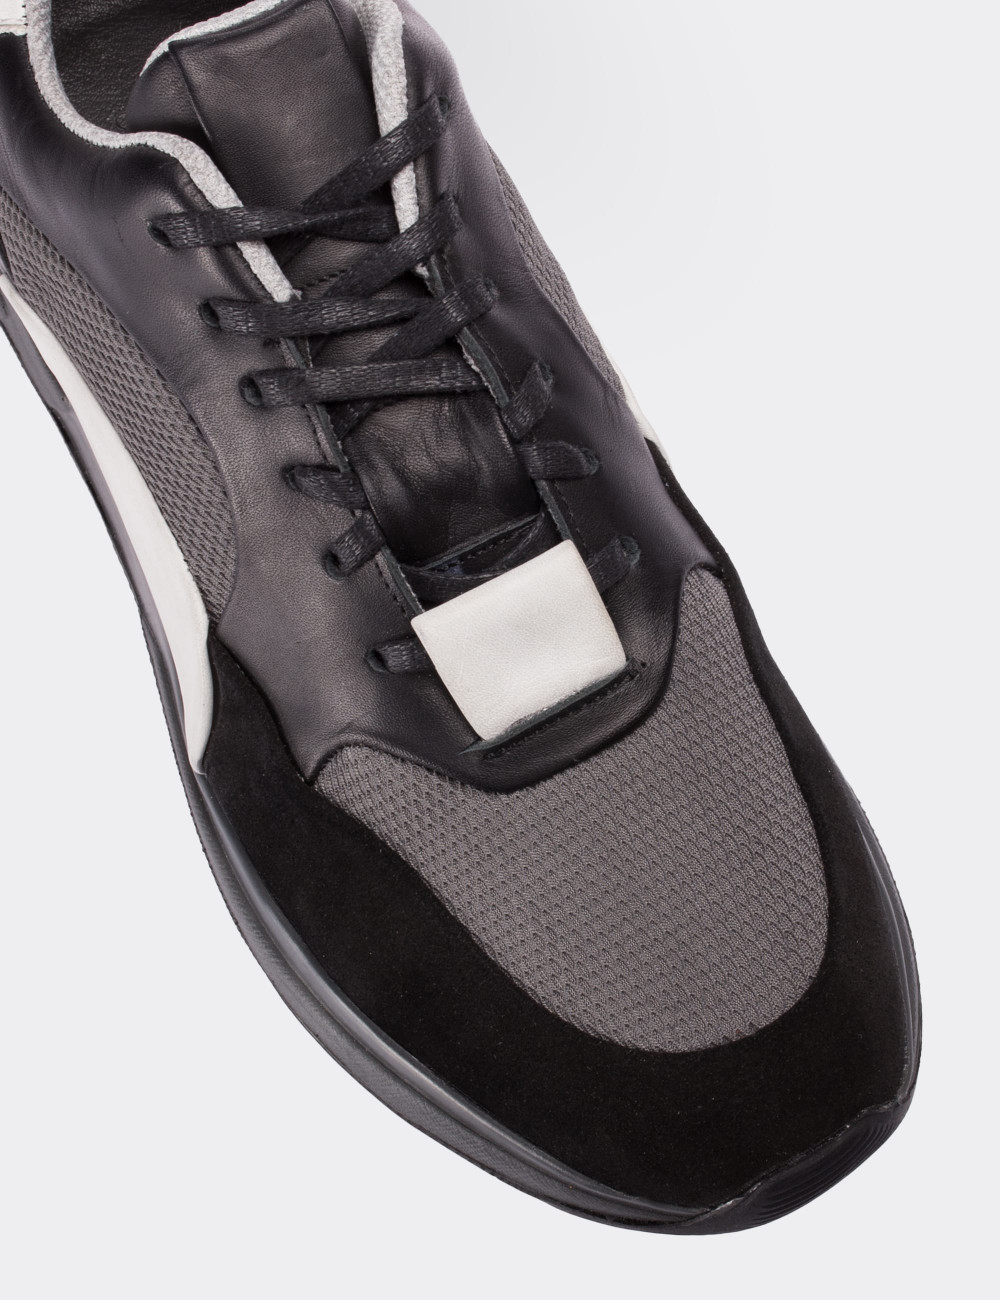 Black Leather Special Edition Sneakers - 01726MSYHT01